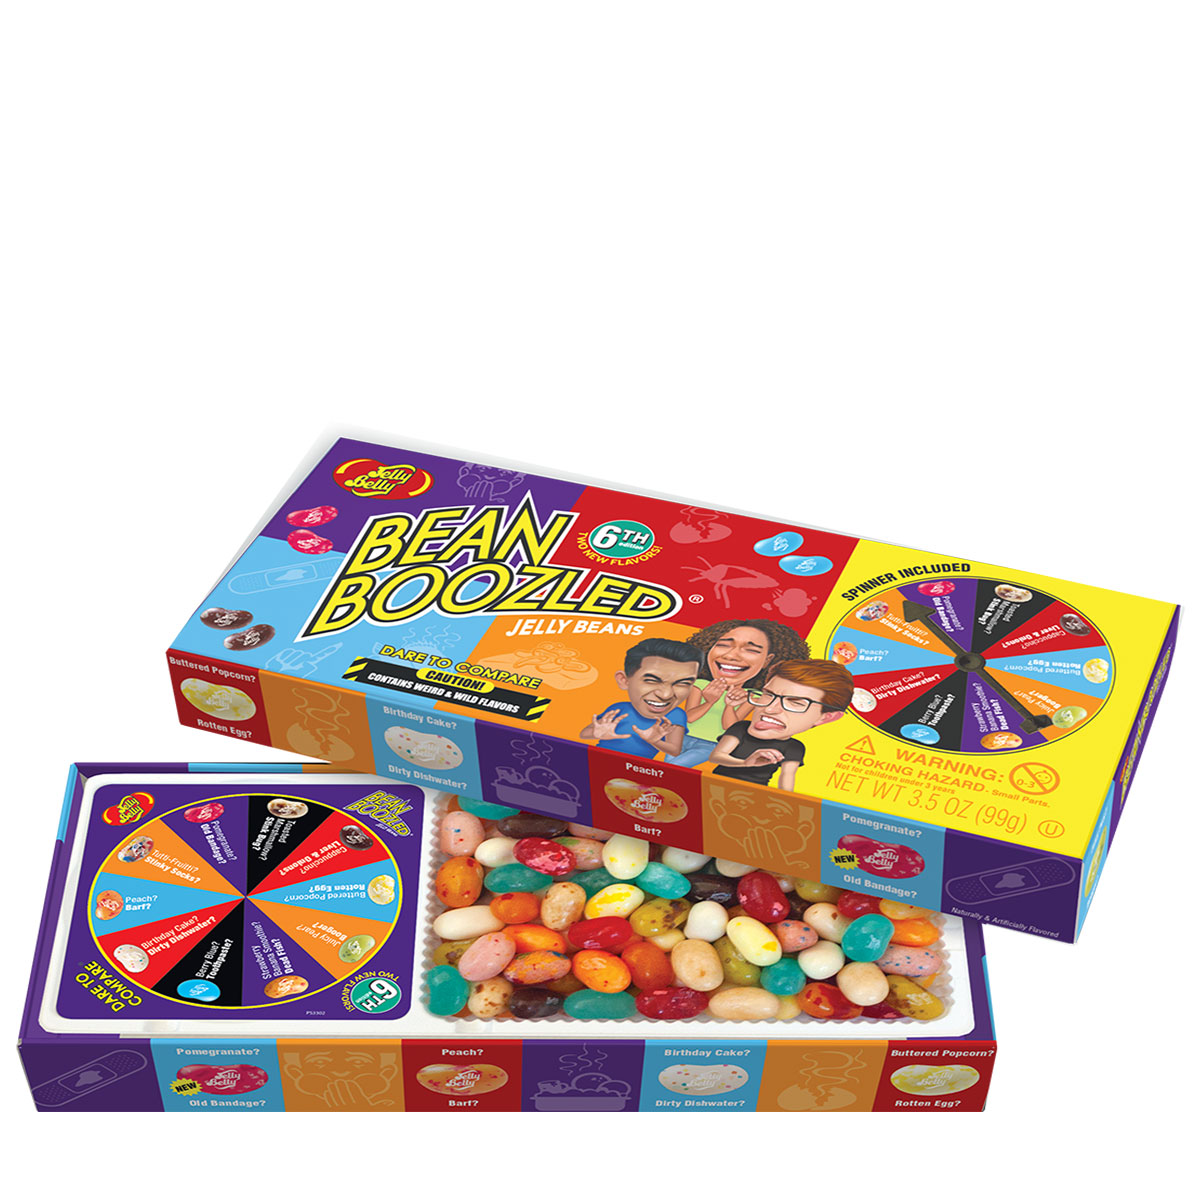 Jelly Belly® Gift Box